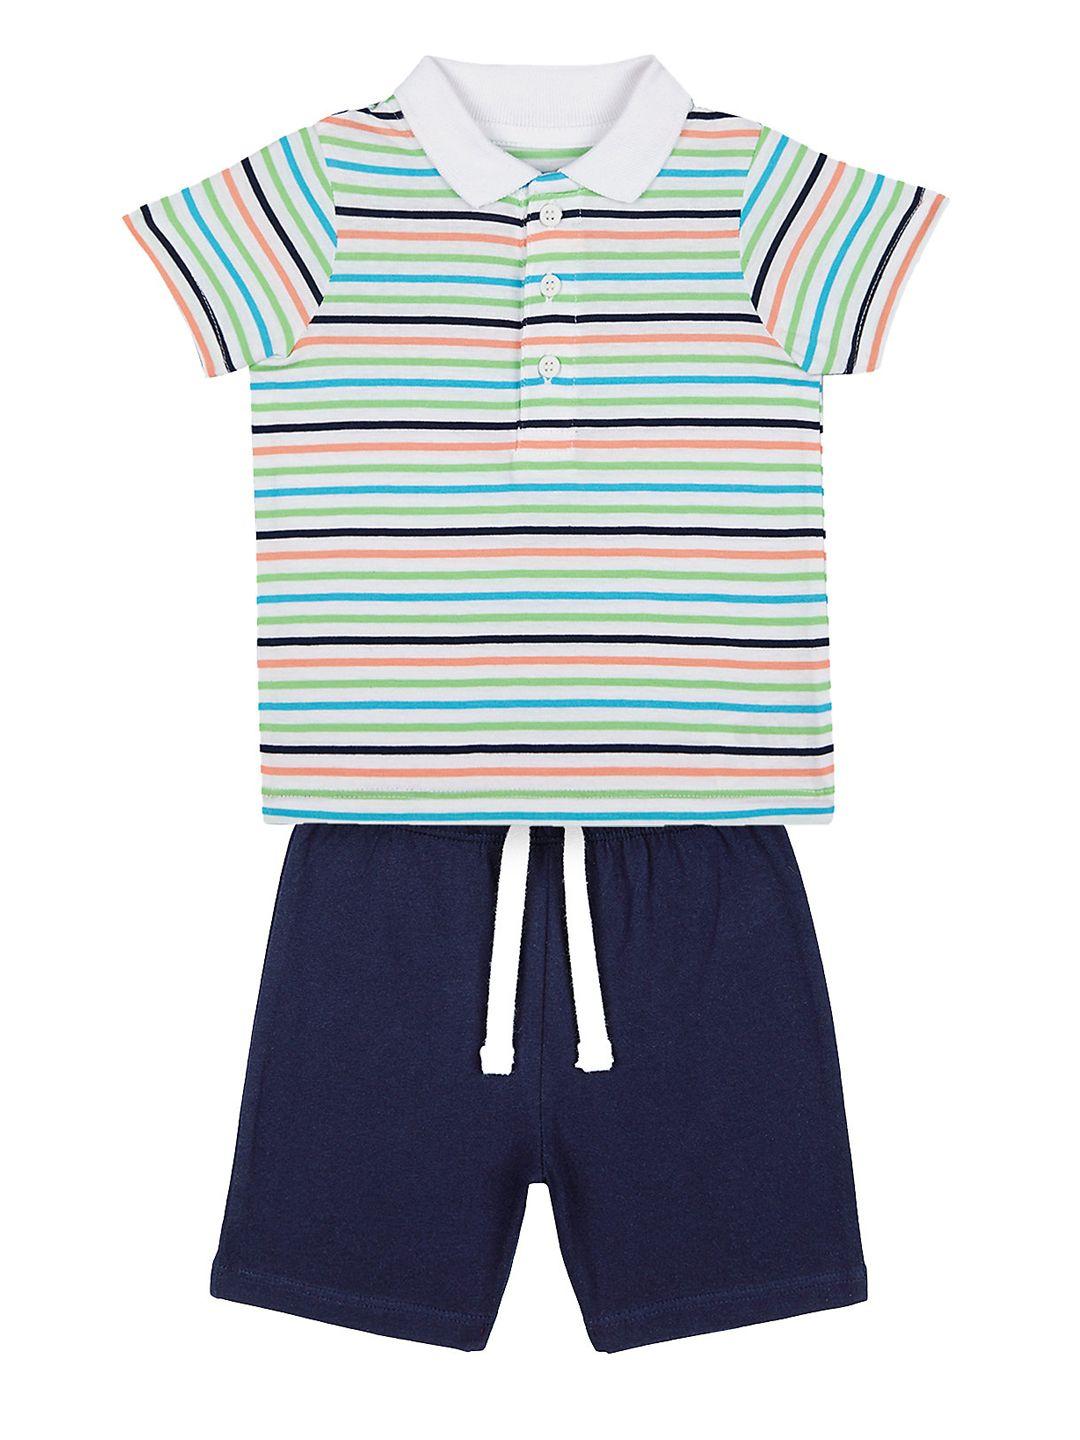 mothercare boys multicoloured striped t-shirt with shorts